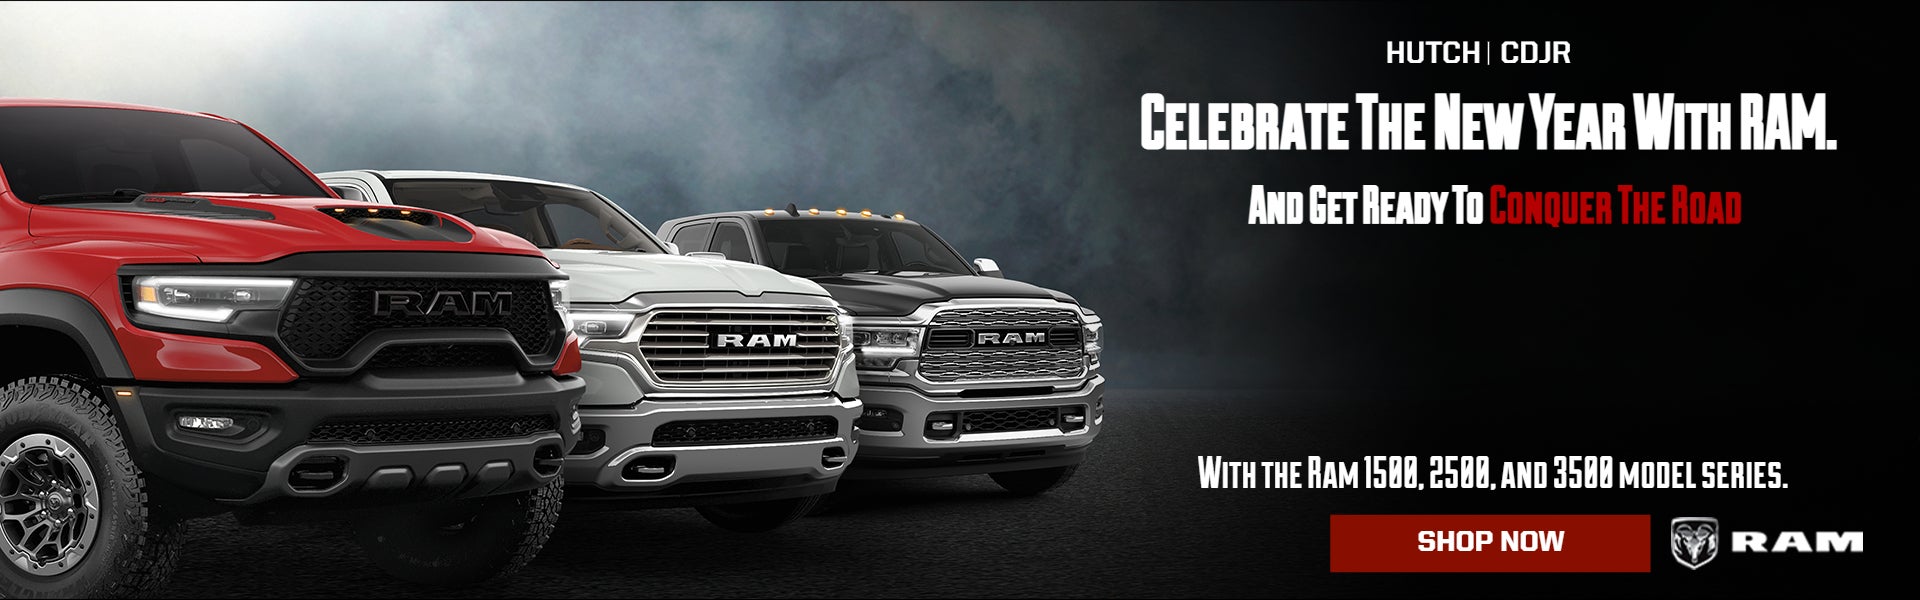 Celebrate The New Year With RAM